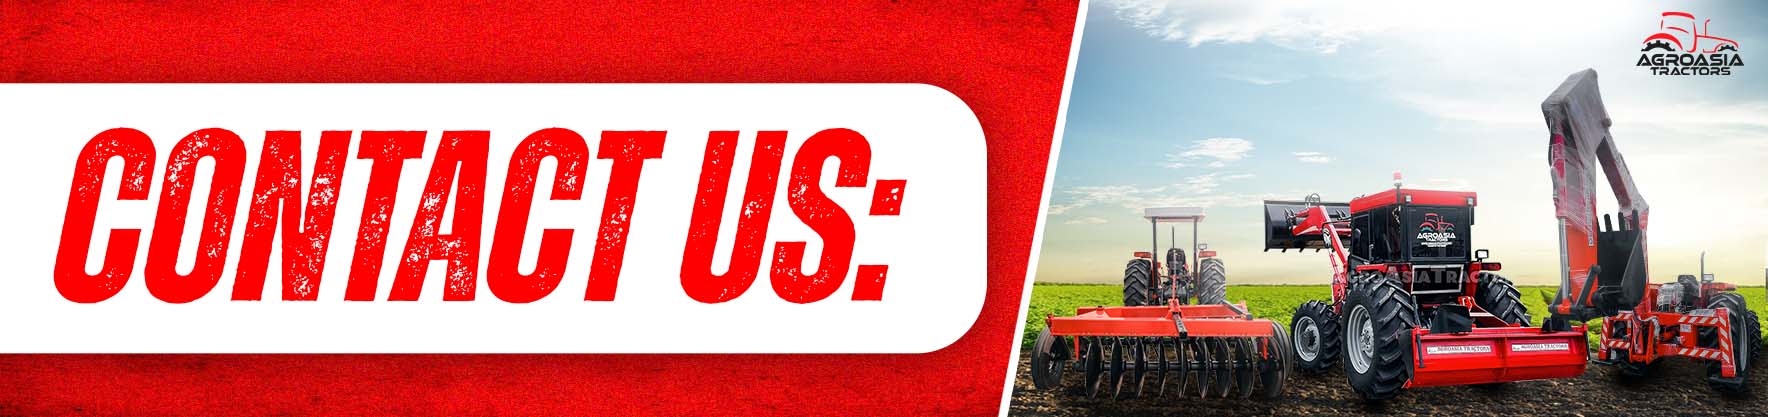 Contact us - Massey Ferguson Tractors for sale by AgroAsia Tractors